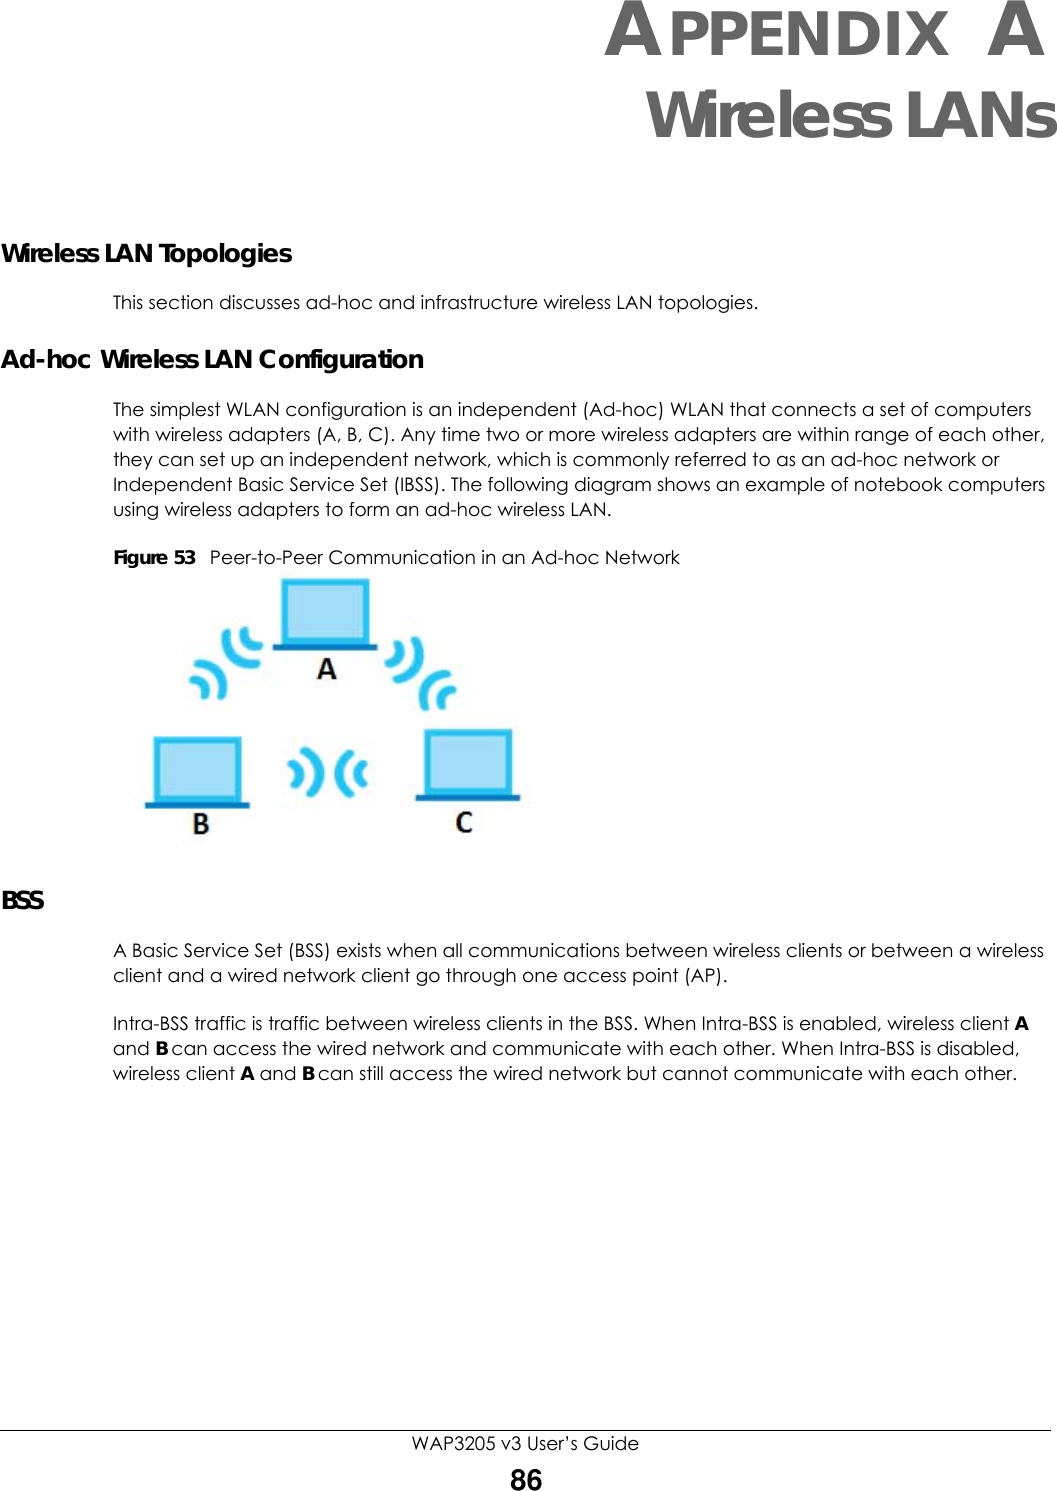 WAP3205 v3 User’s Guide86APPENDIX AWireless LANsWireless LAN TopologiesThis section discusses ad-hoc and infrastructure wireless LAN topologies.Ad-hoc Wireless LAN ConfigurationThe simplest WLAN configuration is an independent (Ad-hoc) WLAN that connects a set of computers with wireless adapters (A, B, C). Any time two or more wireless adapters are within range of each other, they can set up an independent network, which is commonly referred to as an ad-hoc network or Independent Basic Service Set (IBSS). The following diagram shows an example of notebook computers using wireless adapters to form an ad-hoc wireless LAN. Figure 53   Peer-to-Peer Communication in an Ad-hoc NetworkBSSA Basic Service Set (BSS) exists when all communications between wireless clients or between a wireless client and a wired network client go through one access point (AP). Intra-BSS traffic is traffic between wireless clients in the BSS. When Intra-BSS is enabled, wireless client A and B can access the wired network and communicate with each other. When Intra-BSS is disabled, wireless client A and B can still access the wired network but cannot communicate with each other.